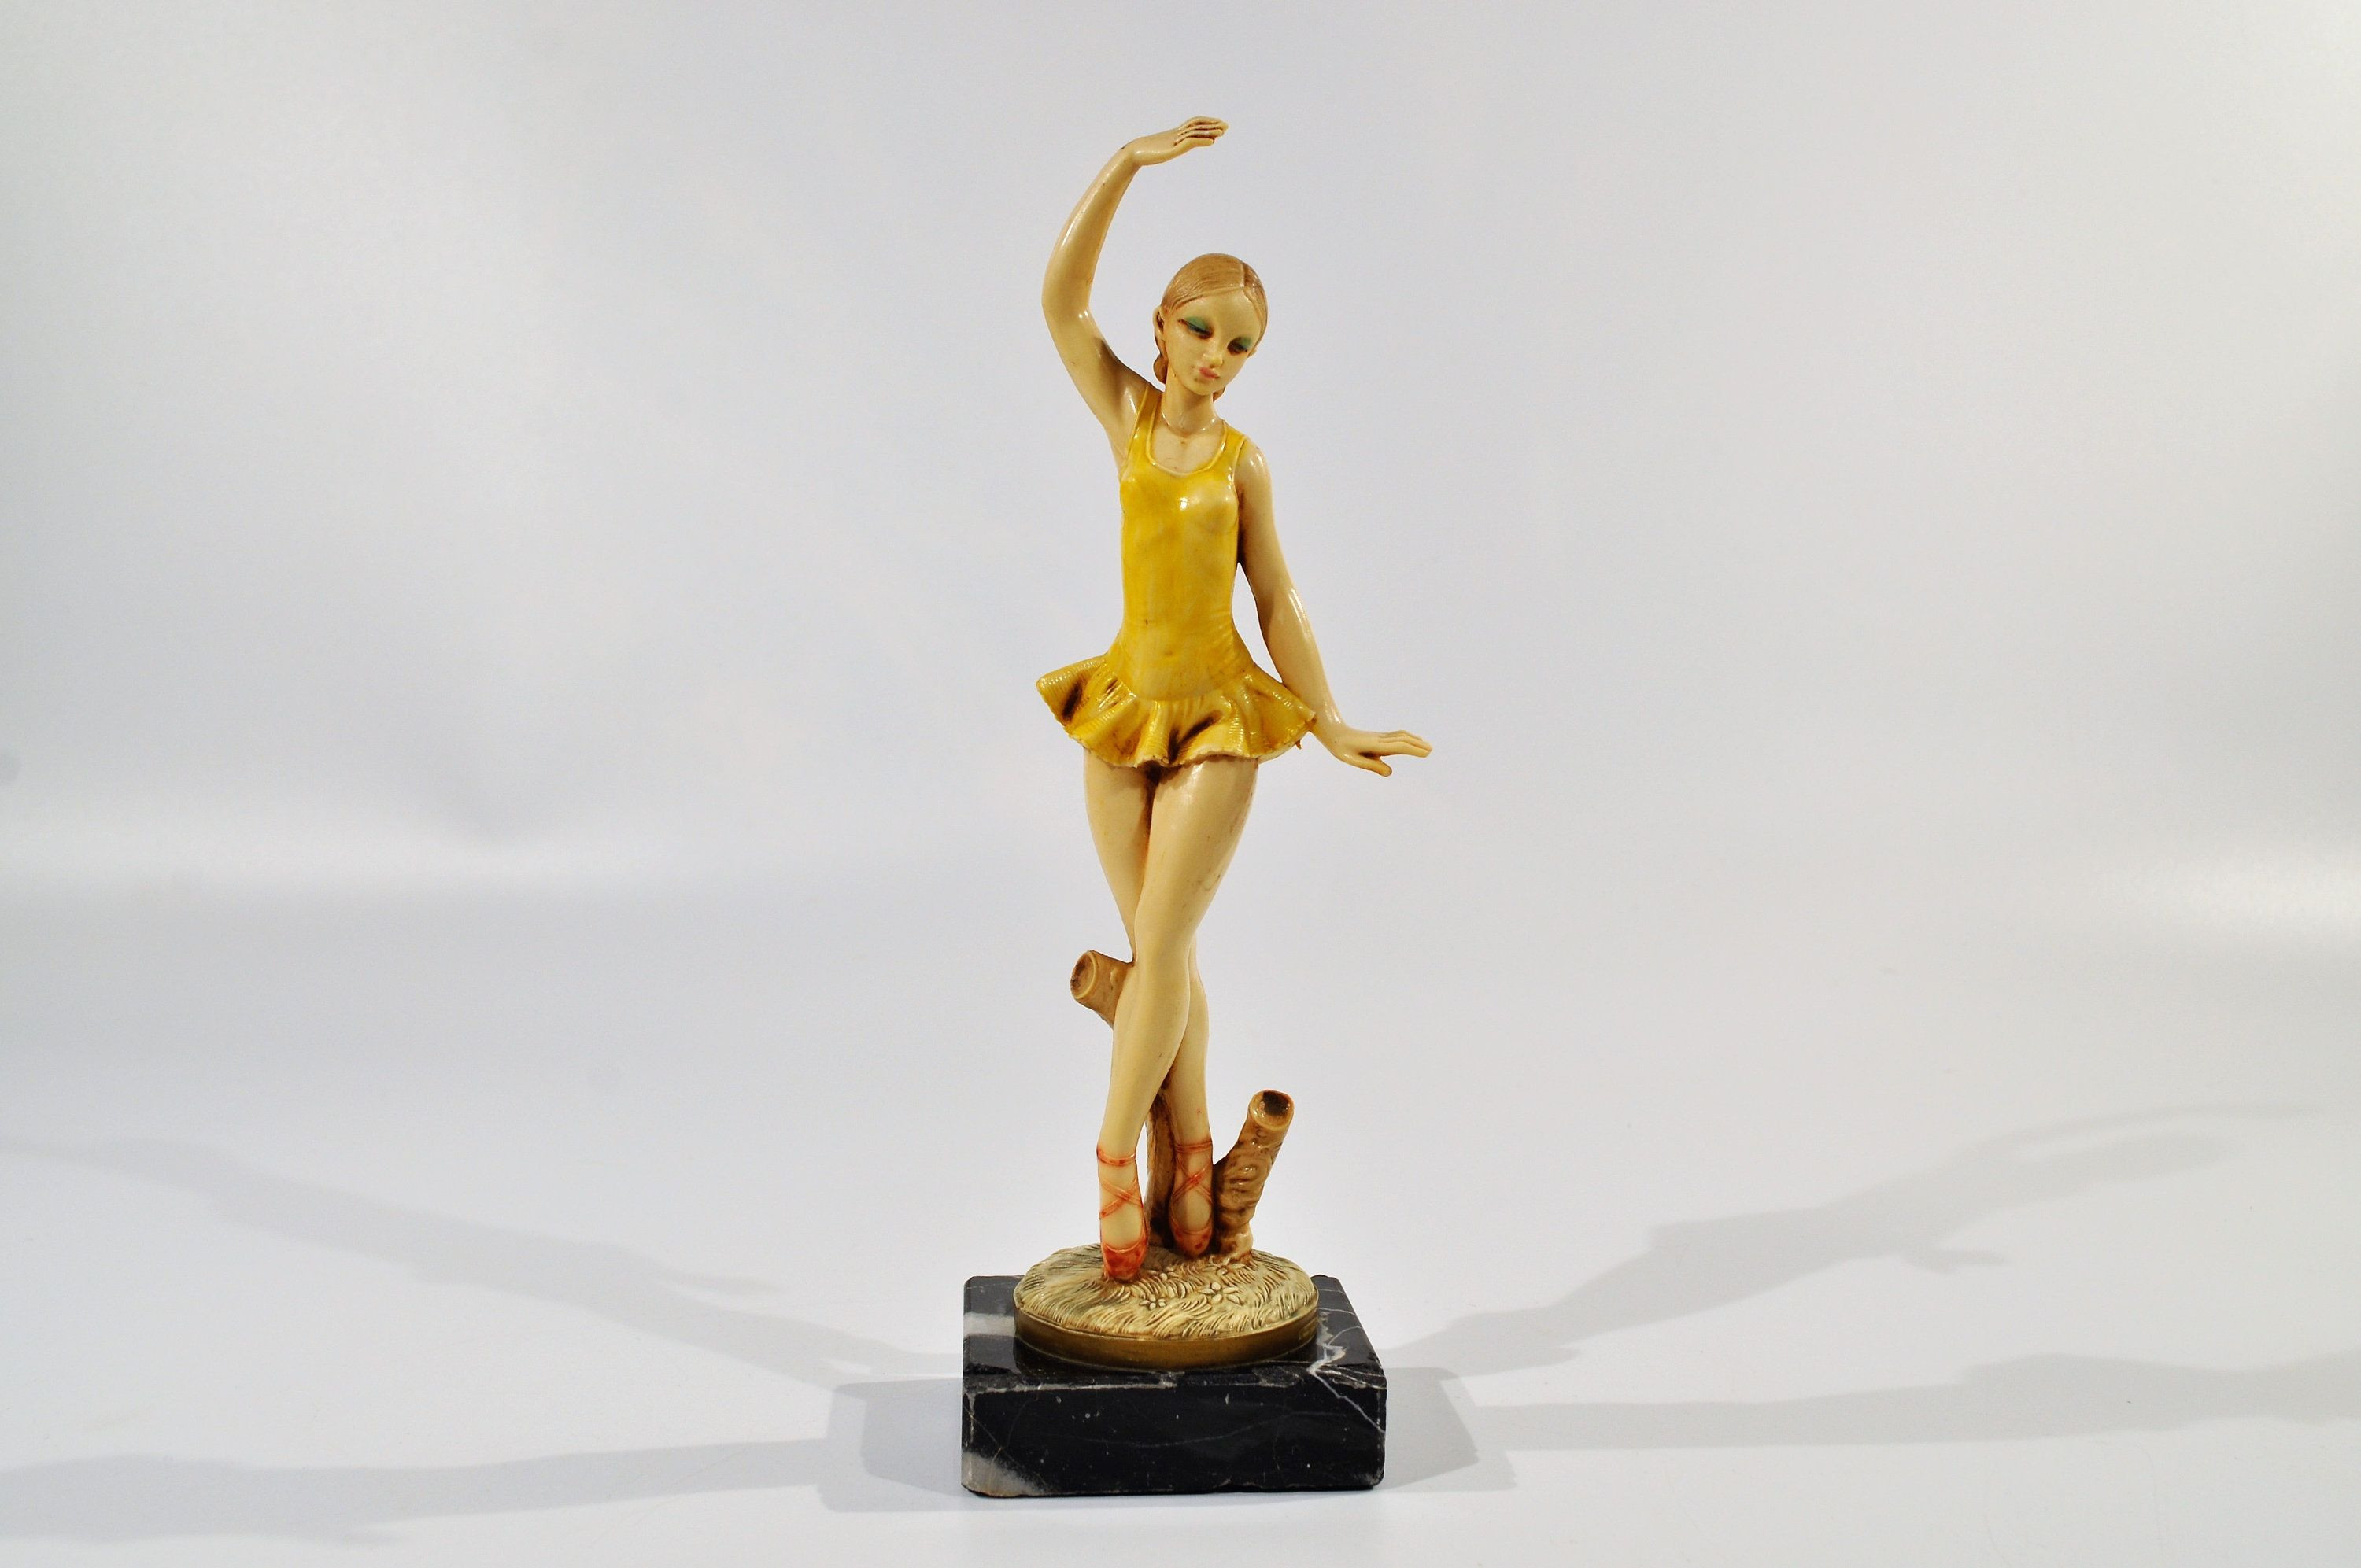 norleans vase made in italy of simonelli ballerina figurine depose made in italy art deco statue with regard to depose made in italy art deco statue woman statue resin art